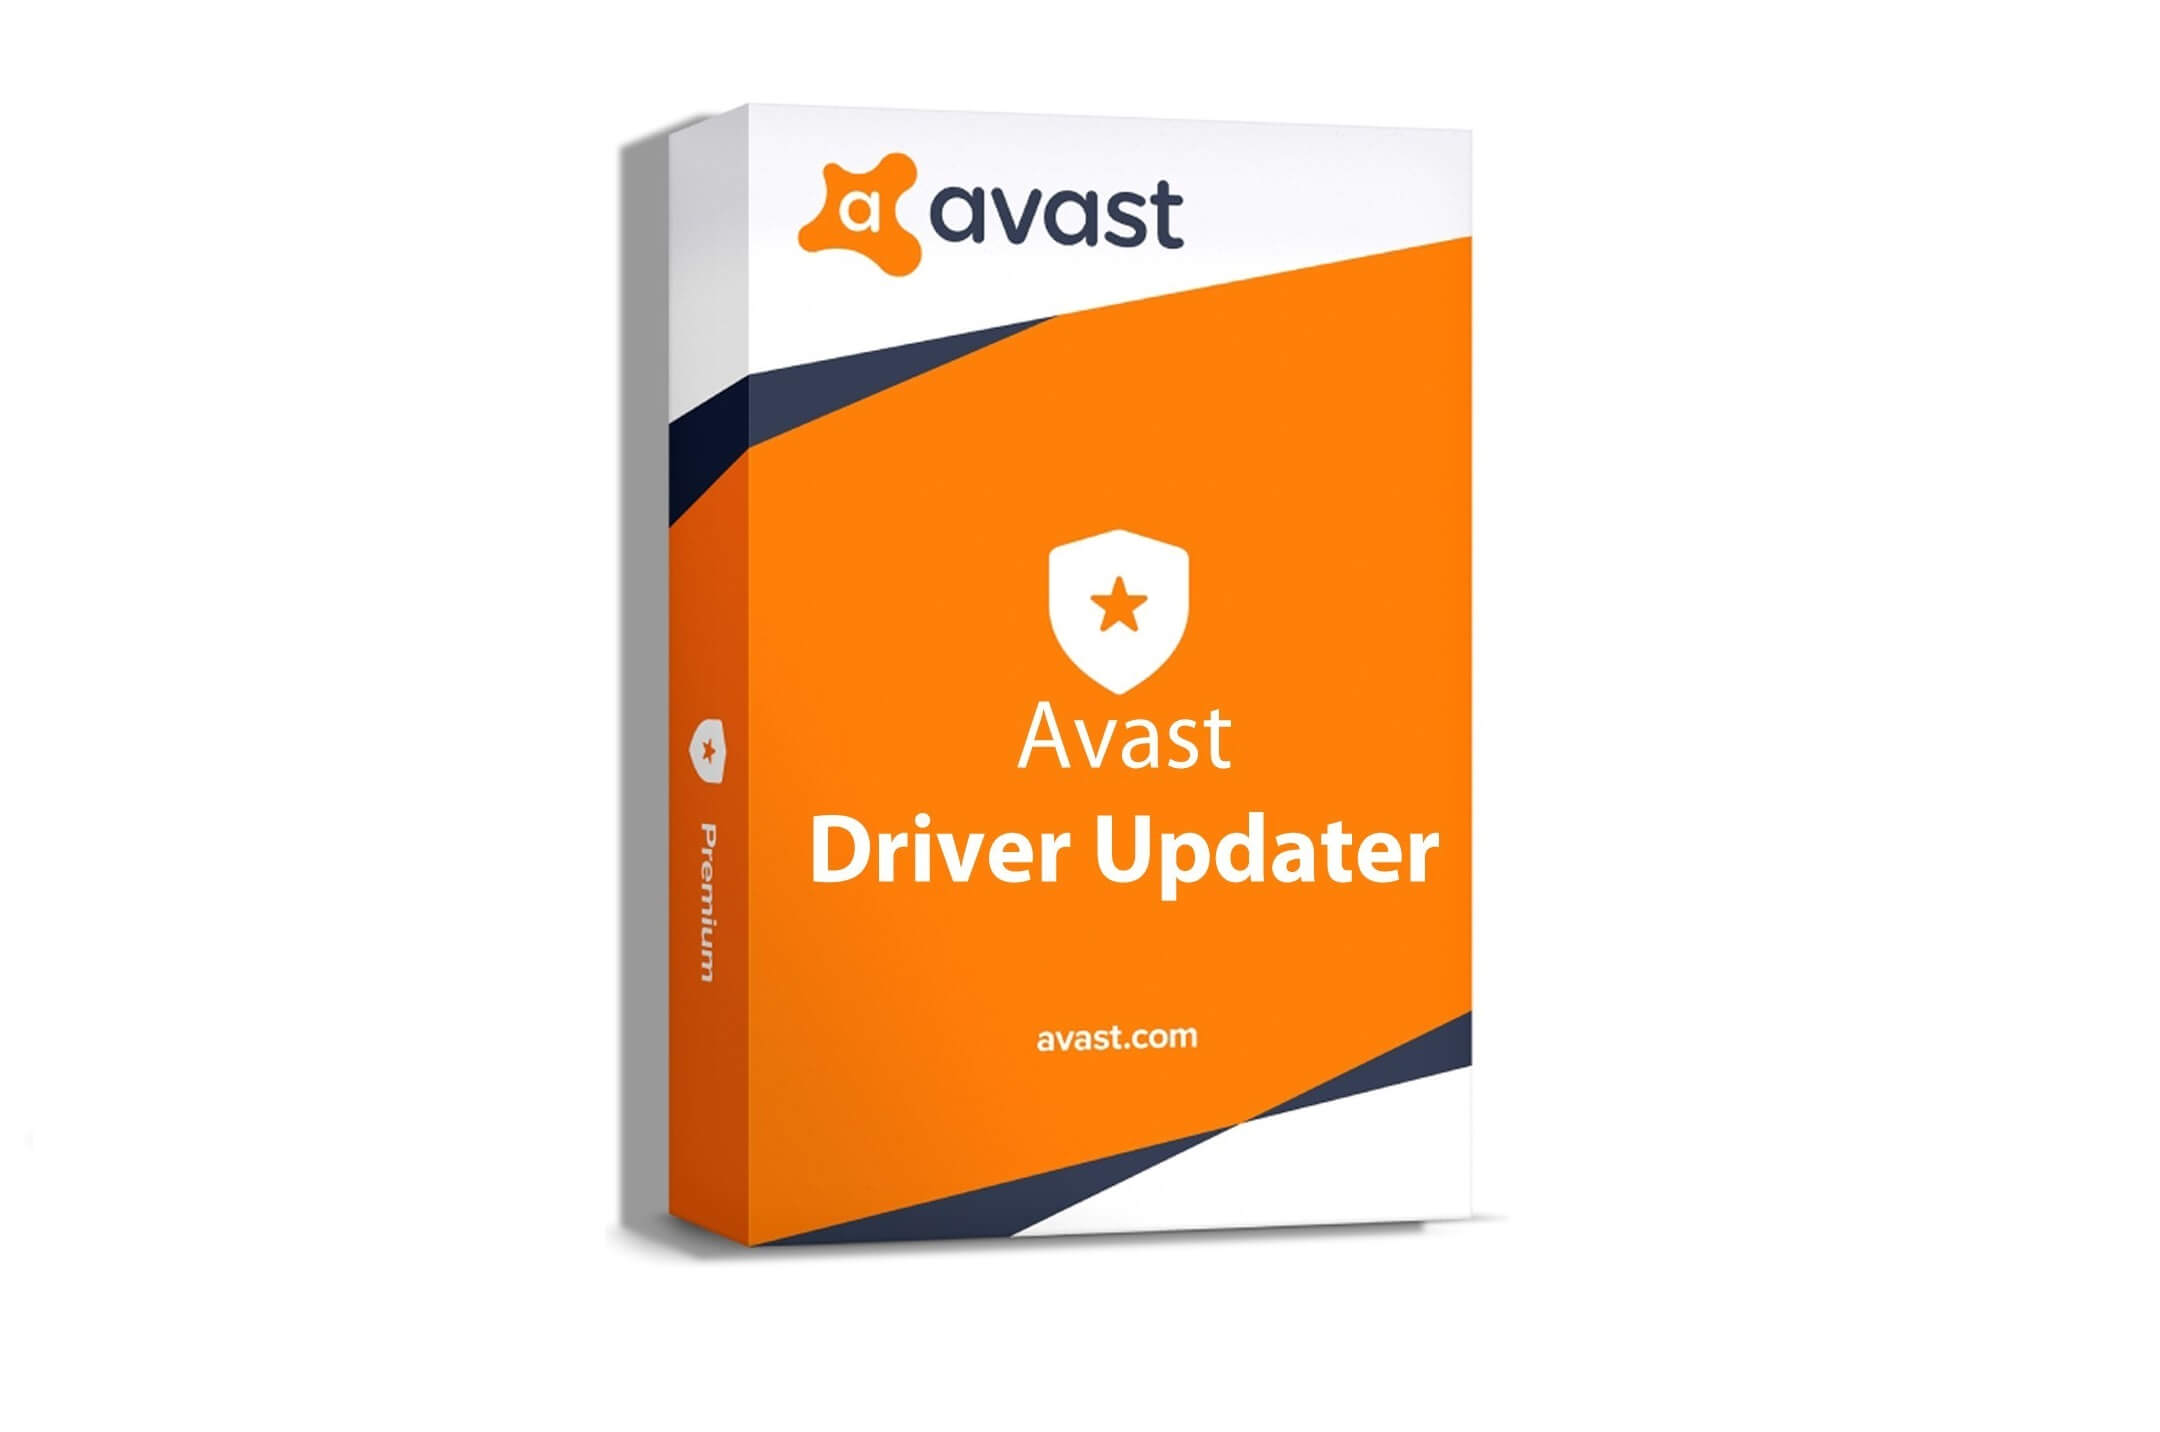 Avast Driver Updater 2.4.0 Cracked